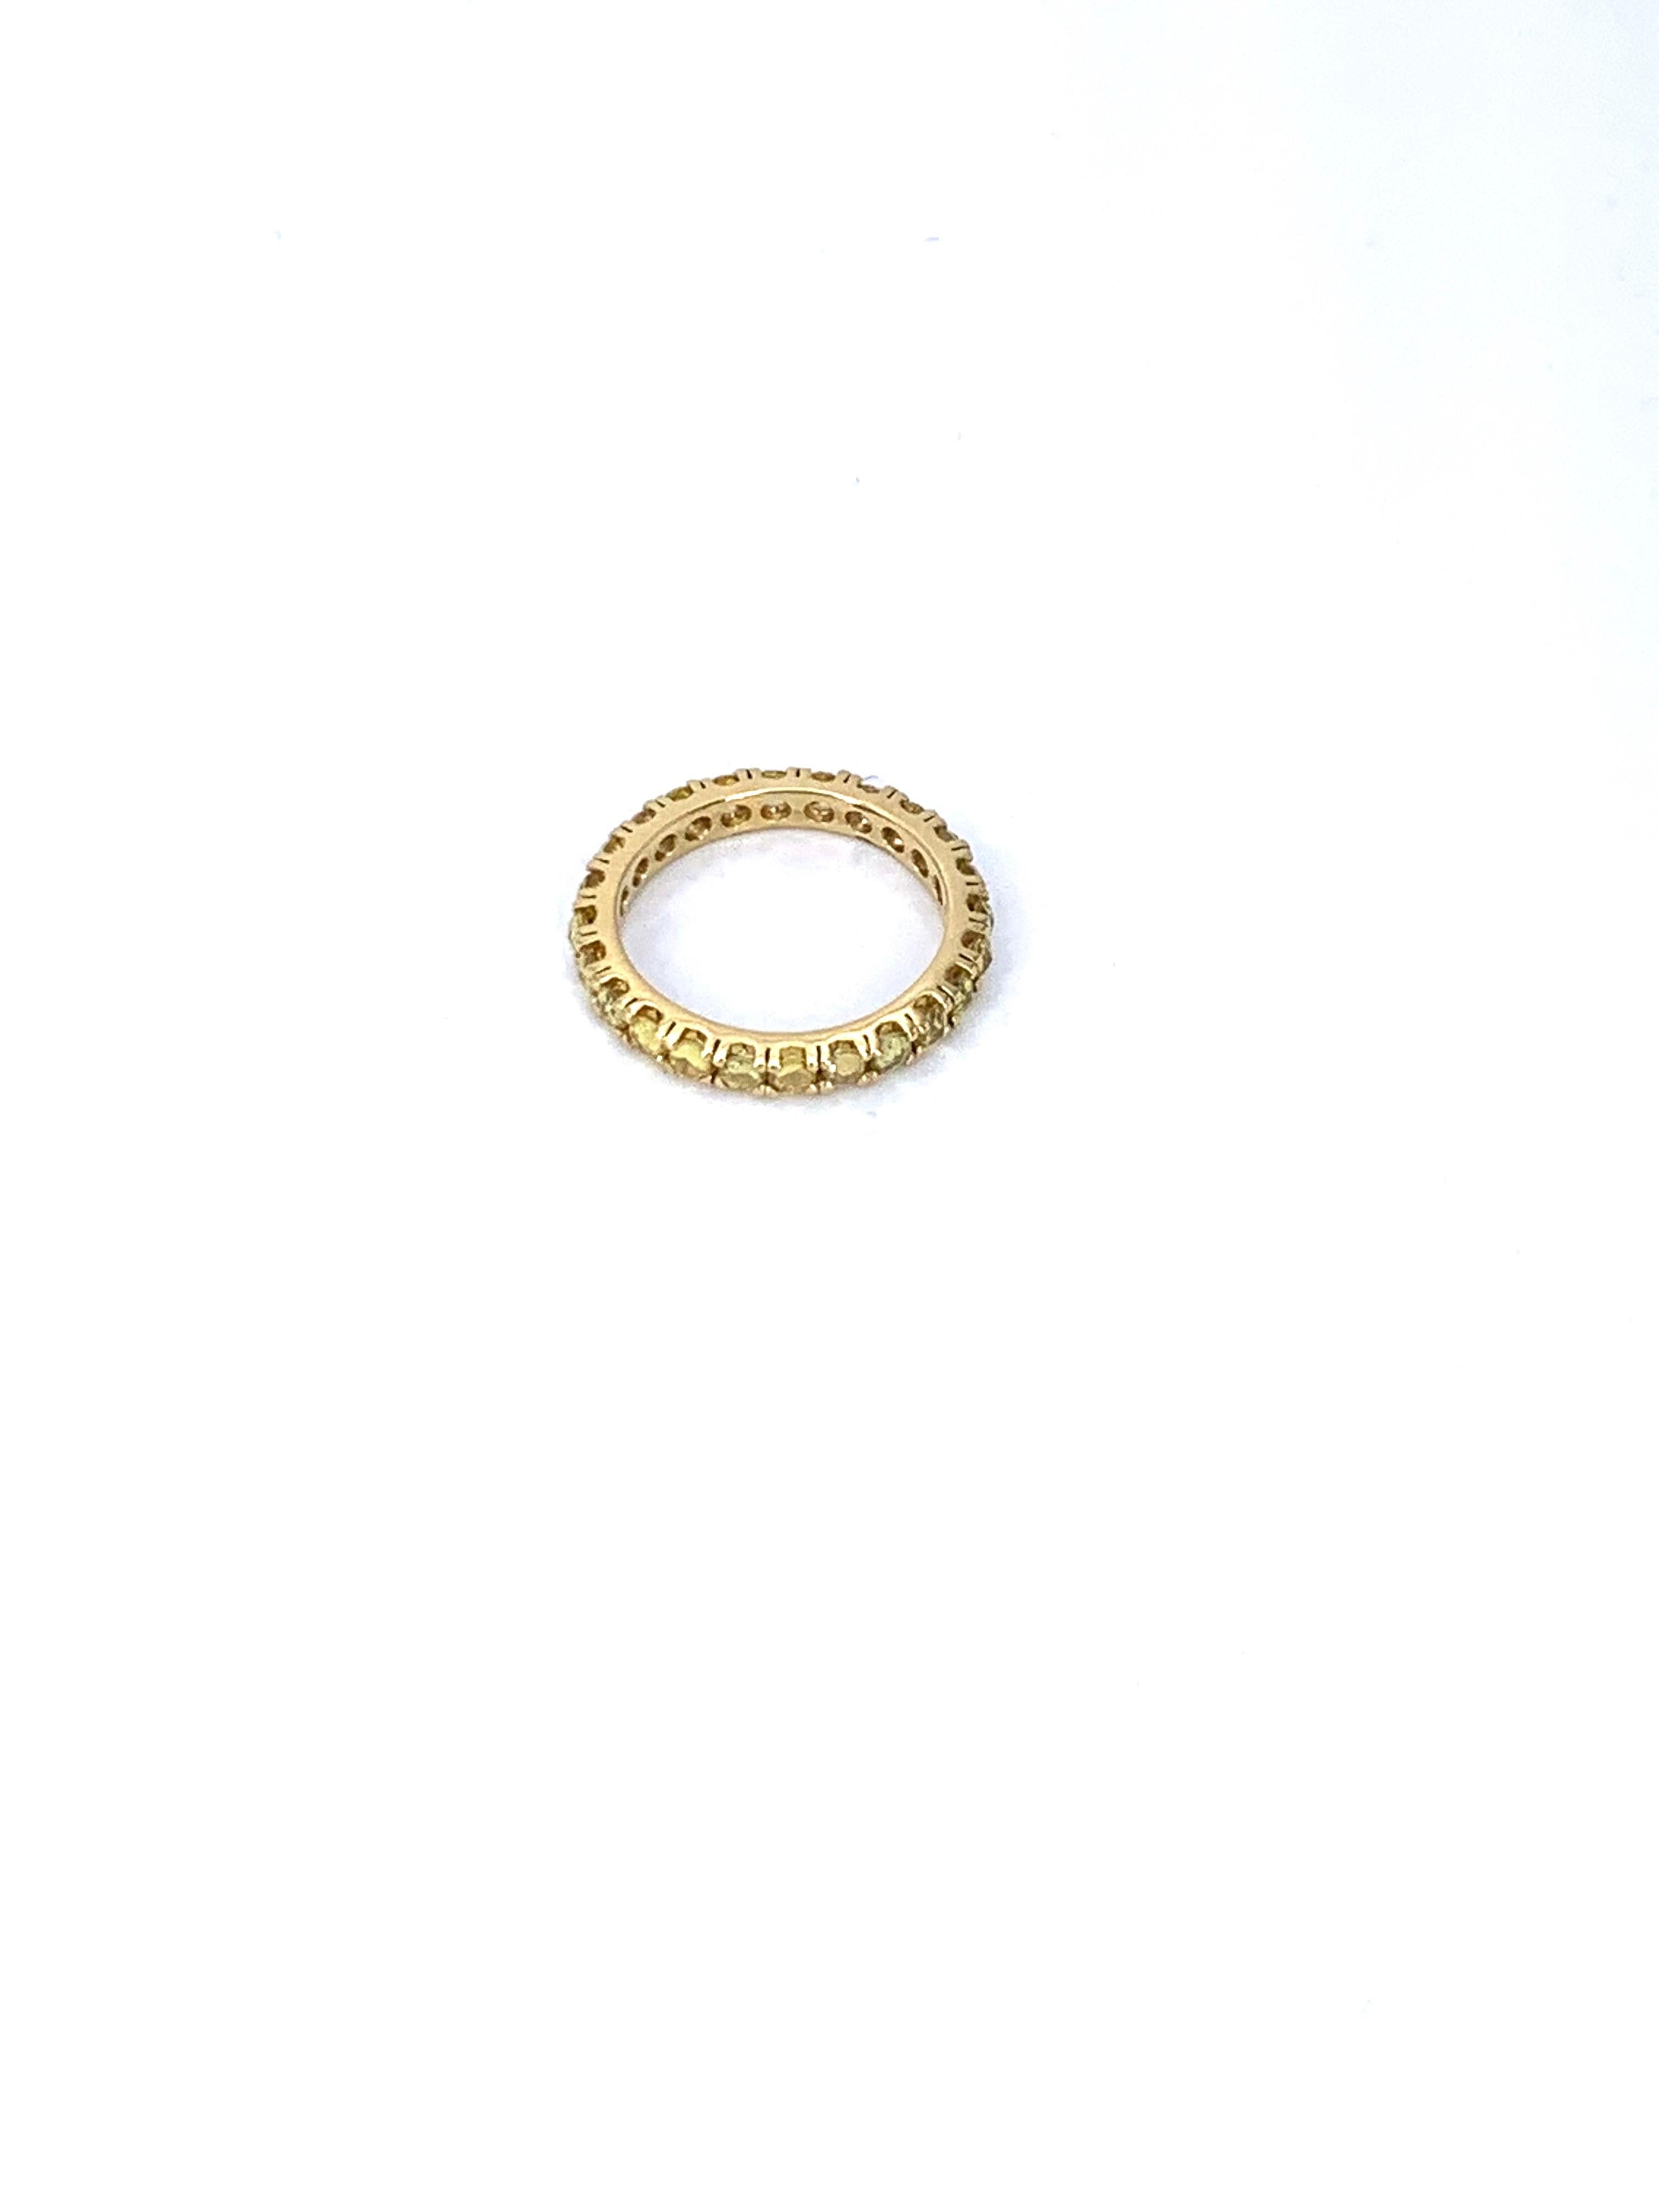 Rose Cut Yellow Sapphire 2.04 Carat in 18Kt Yellow Gold Eternity Unisex Ring